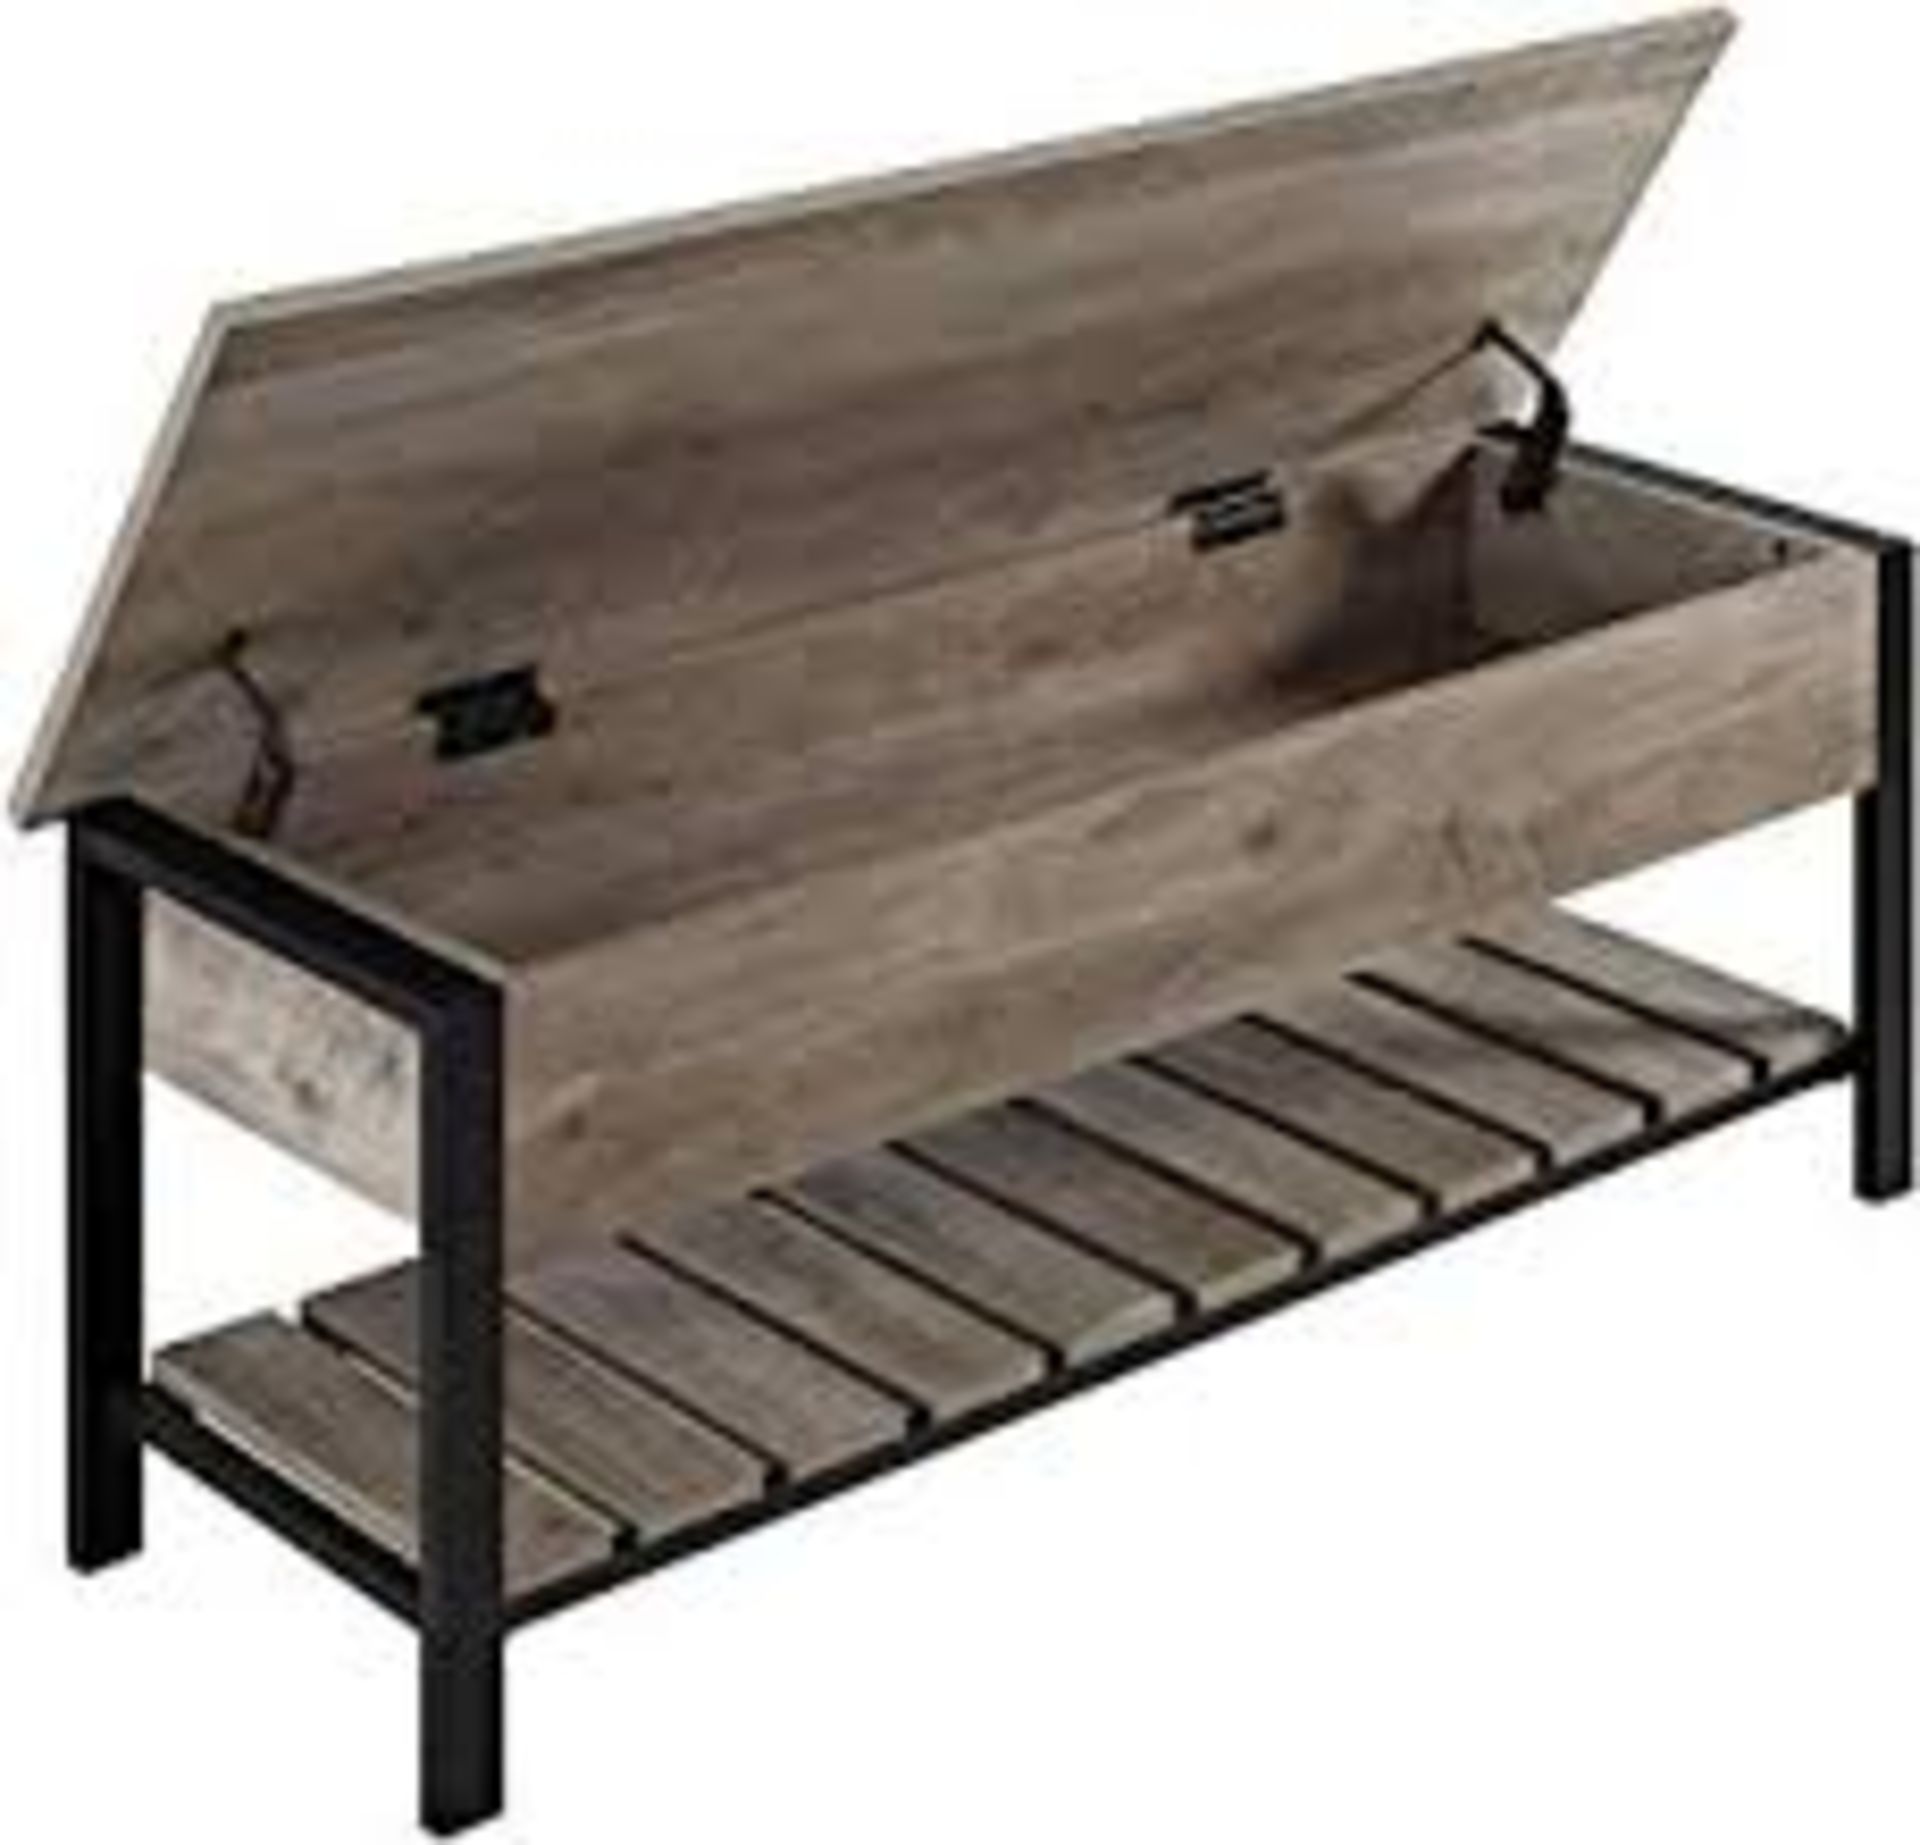 Boxed 48Inch Metal and Wood Storage Bench in Grey Wash RRP £145 (14711) (Public Viewing and